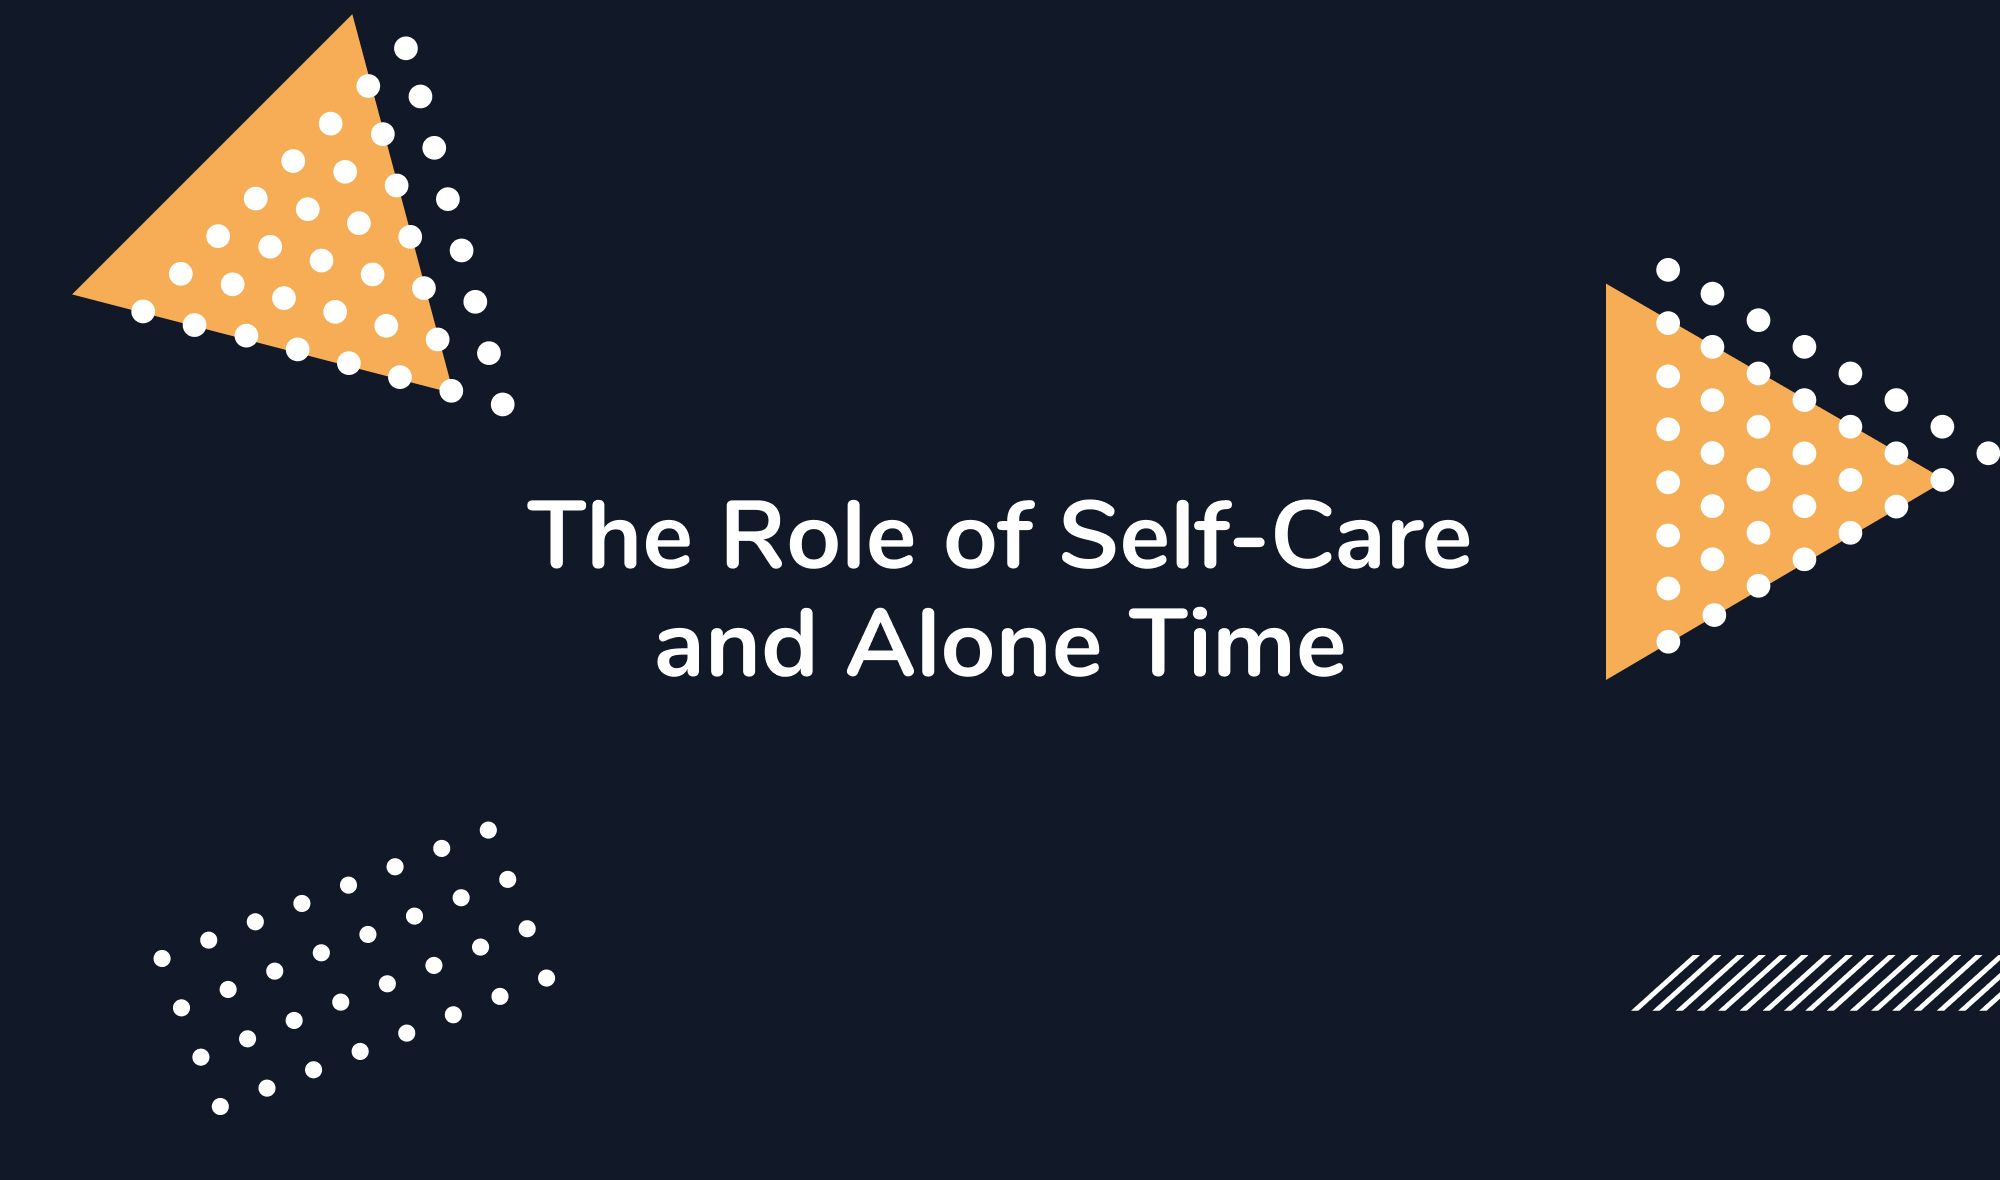 The Role of Self-Care and Alone Time